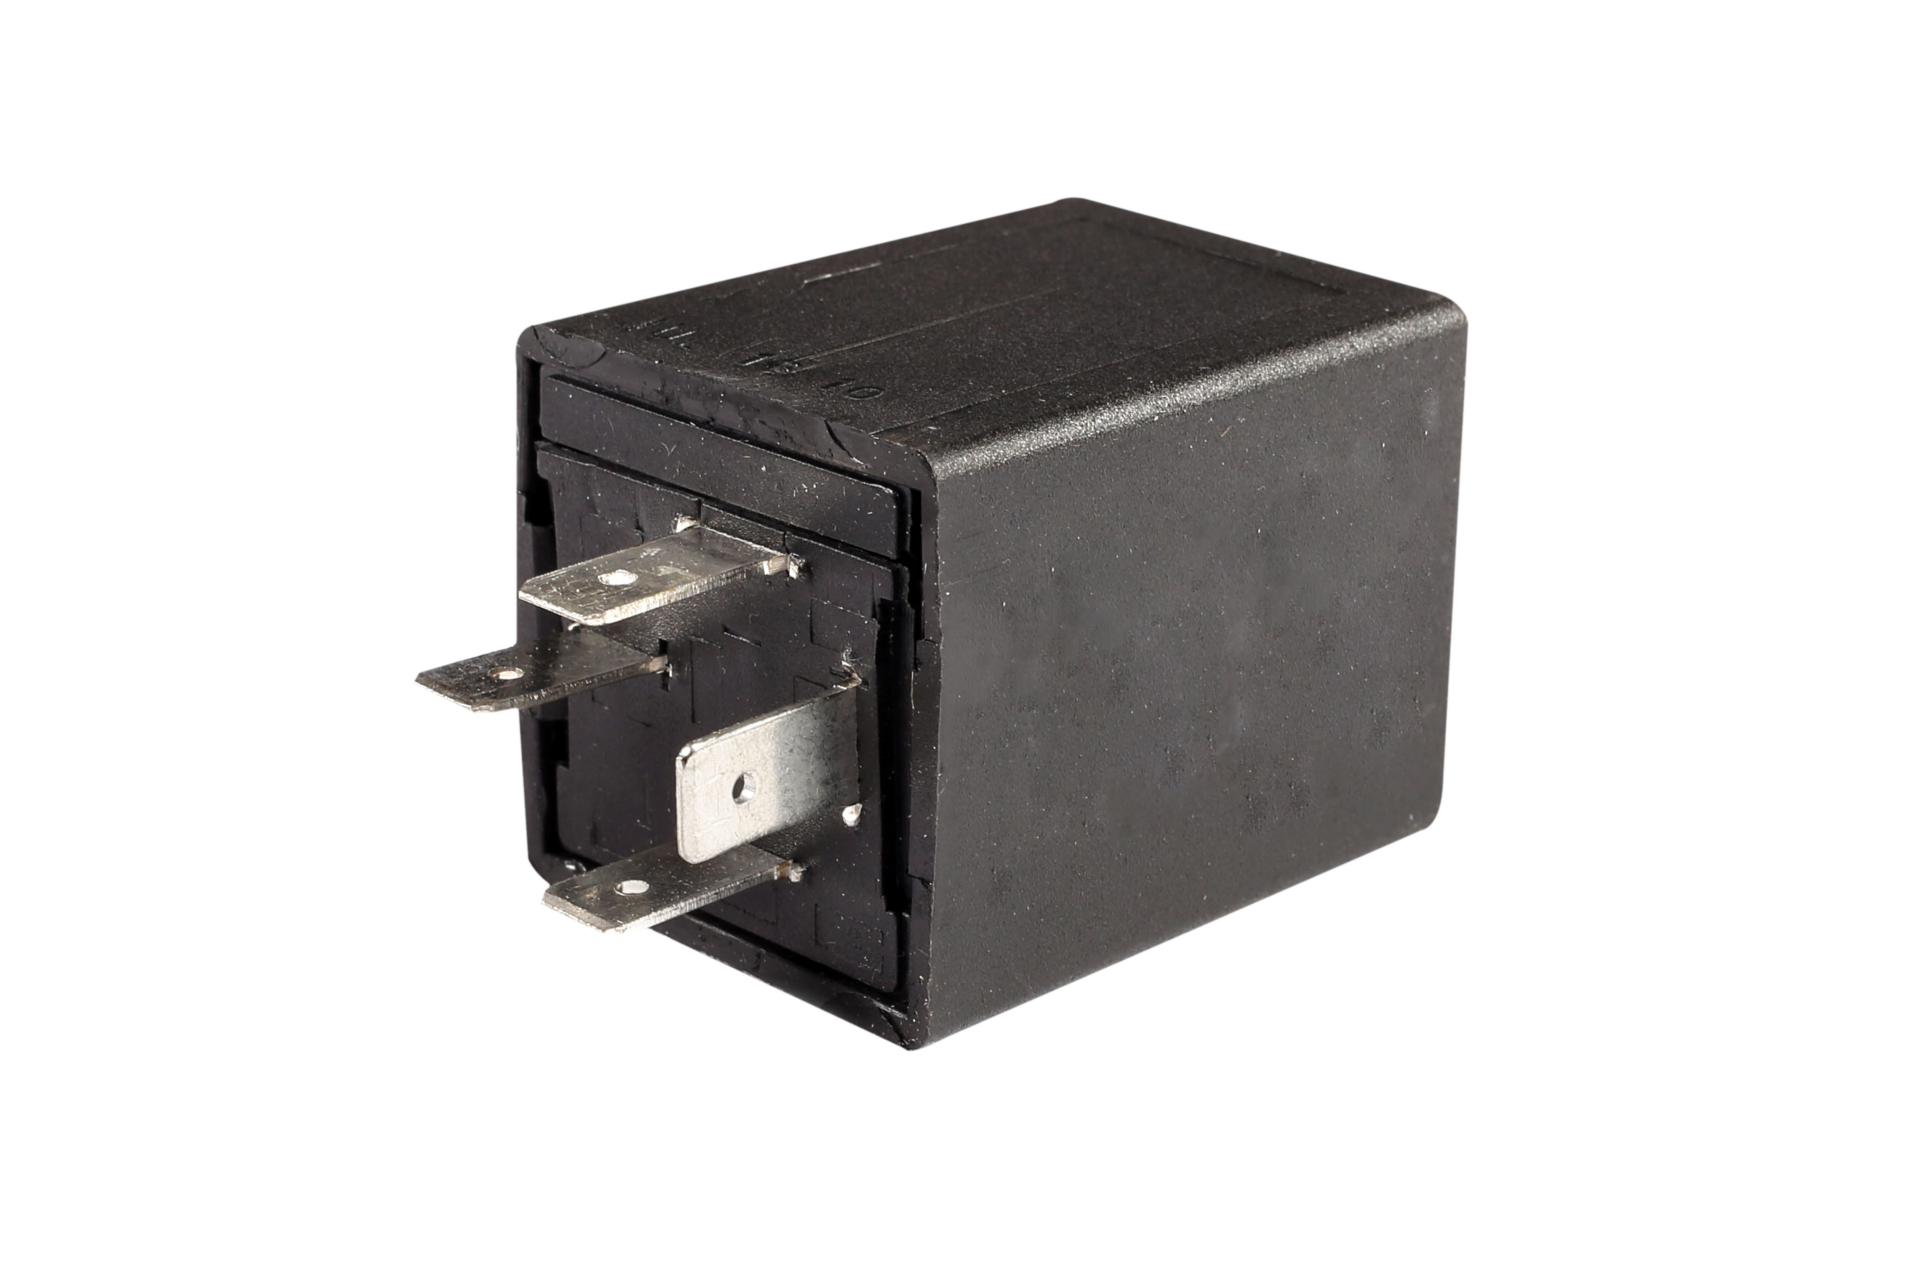 https://static.vecteezy.com/system/resources/previews/021/217/276/original/car-electromagnetic-relay-switch-png.png